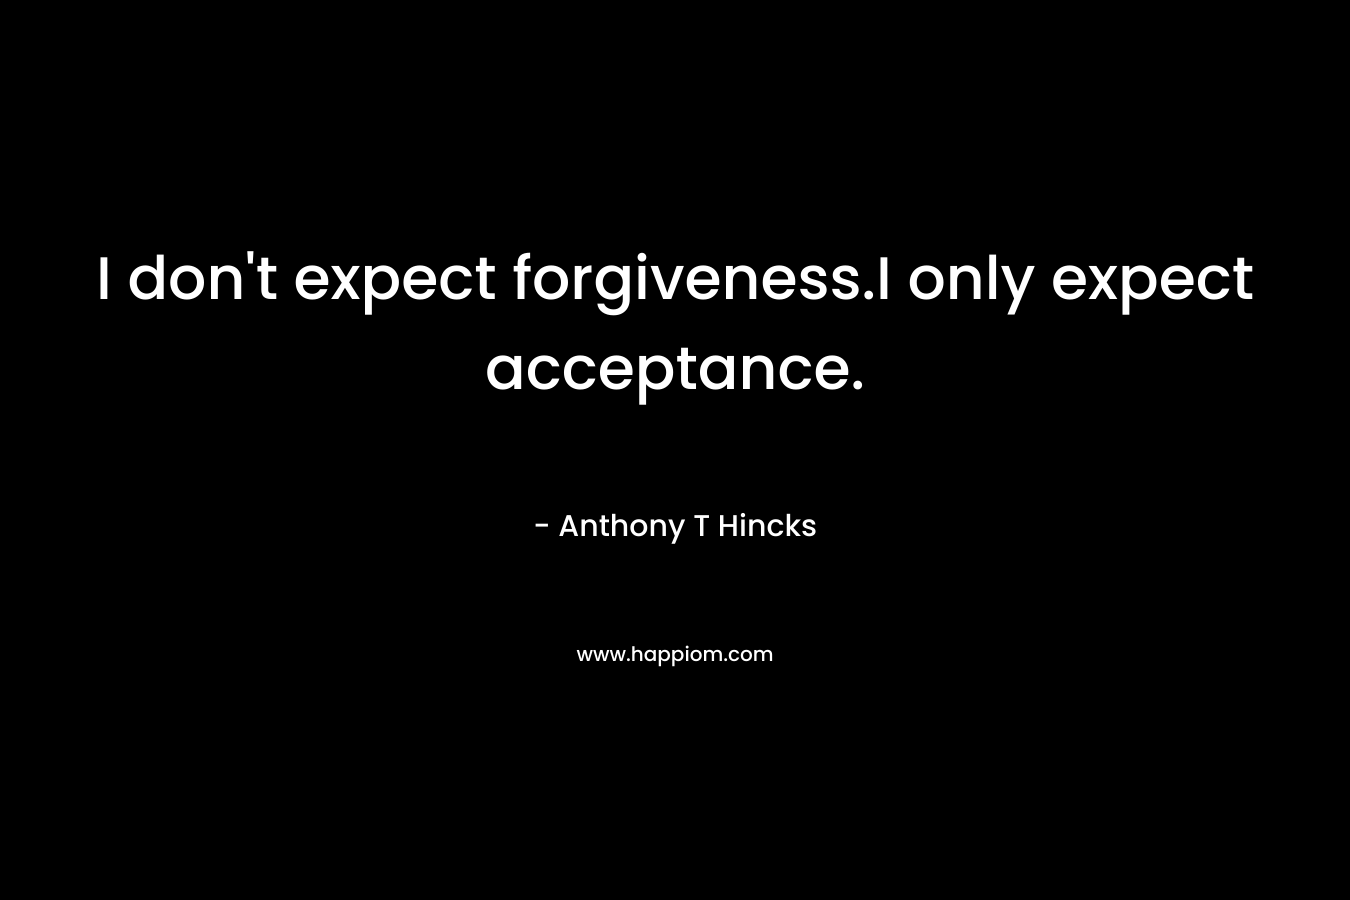 I don't expect forgiveness.I only expect acceptance.